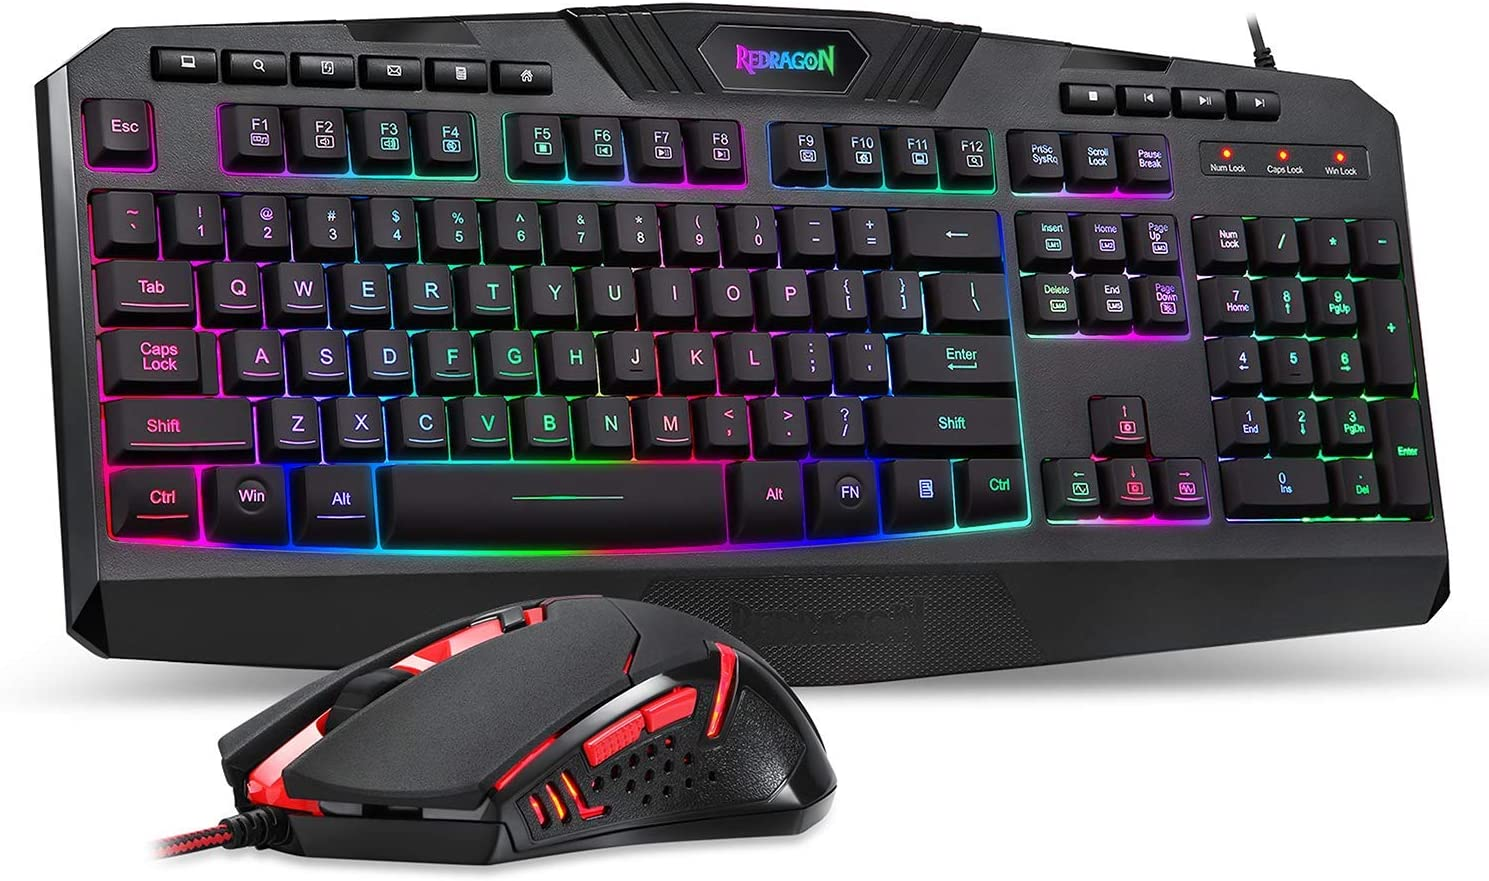 When opting for an external gaming keyboard to use with your laptop, consider a keyboard and mouse combo.